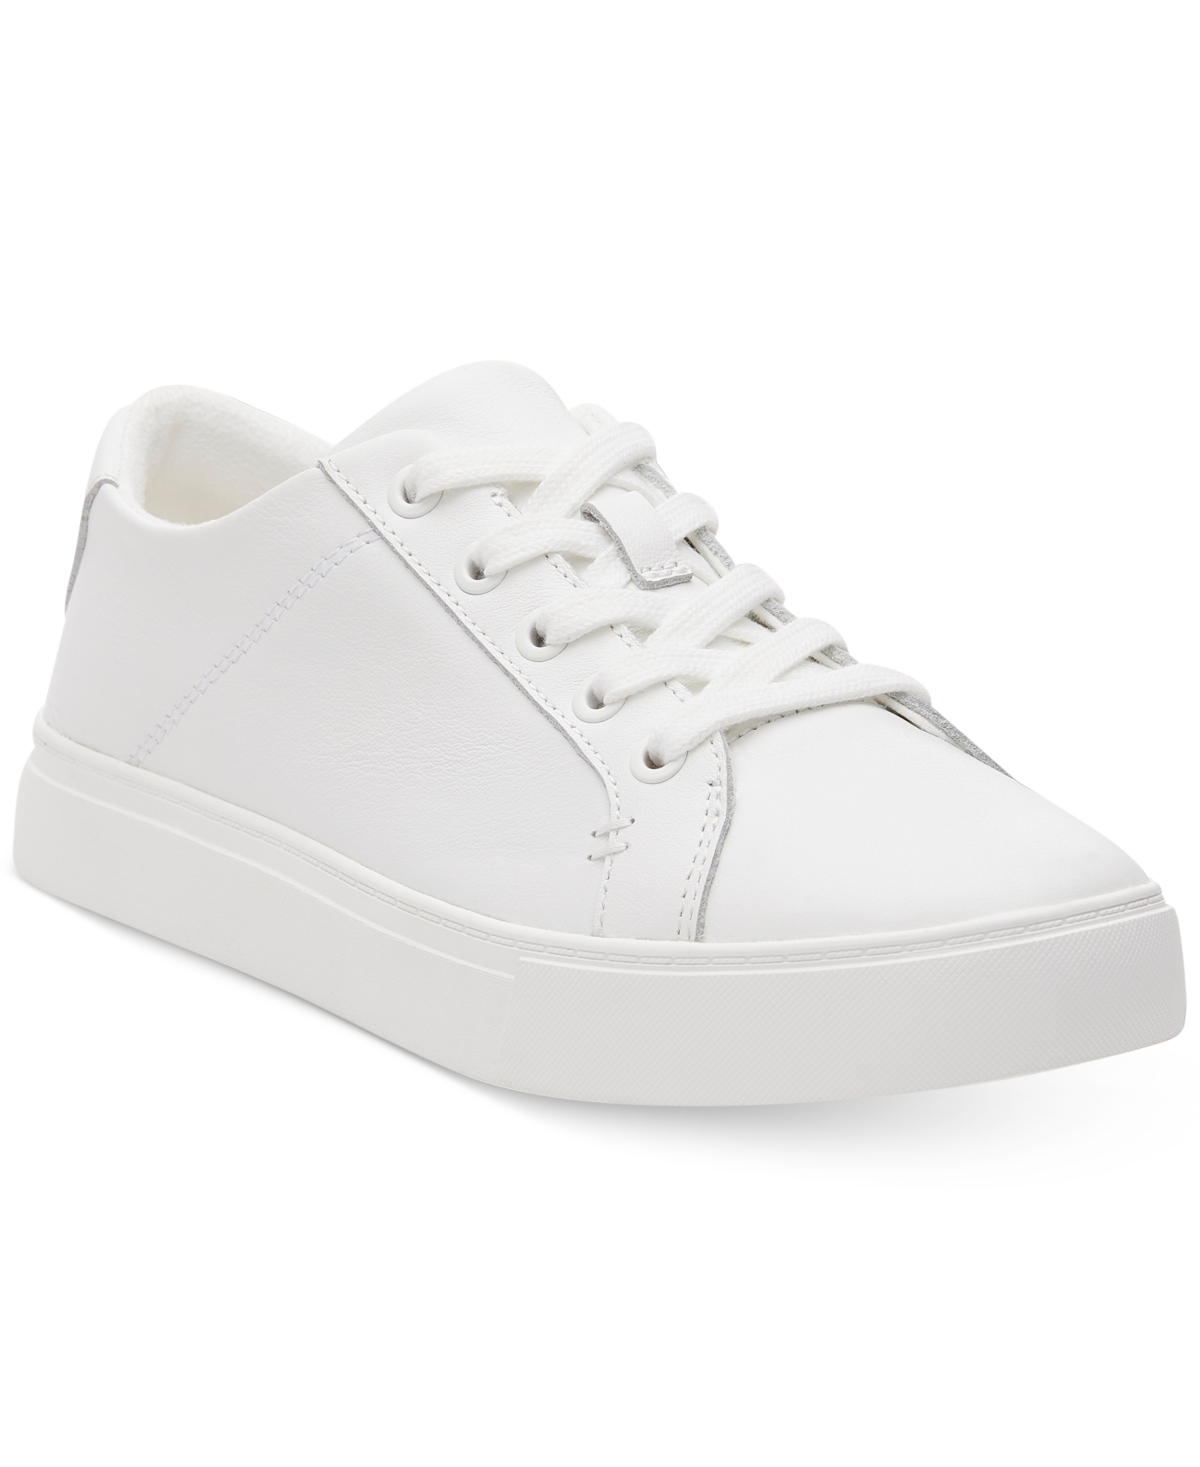 Women's Kameron Casual Lace Up Platform Sneakers - White Leather